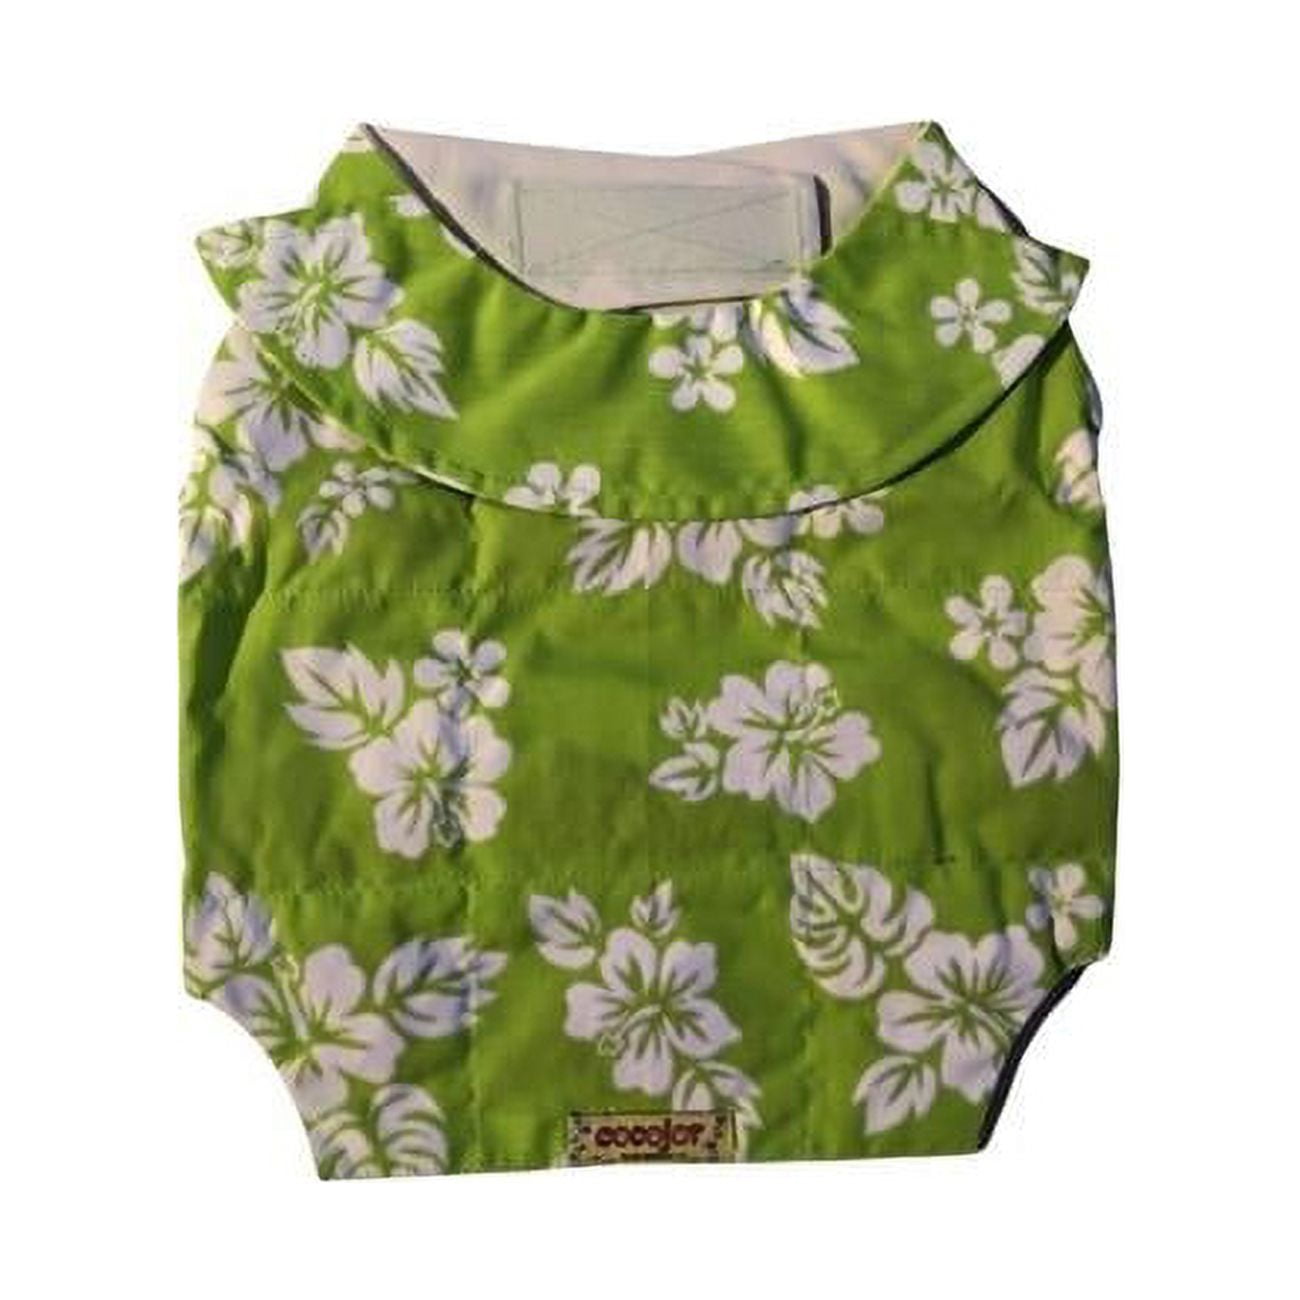 Picture of Cocojor GRN12C355 Hawaii 5-0 Cooling Vest for Dog, Green - Small